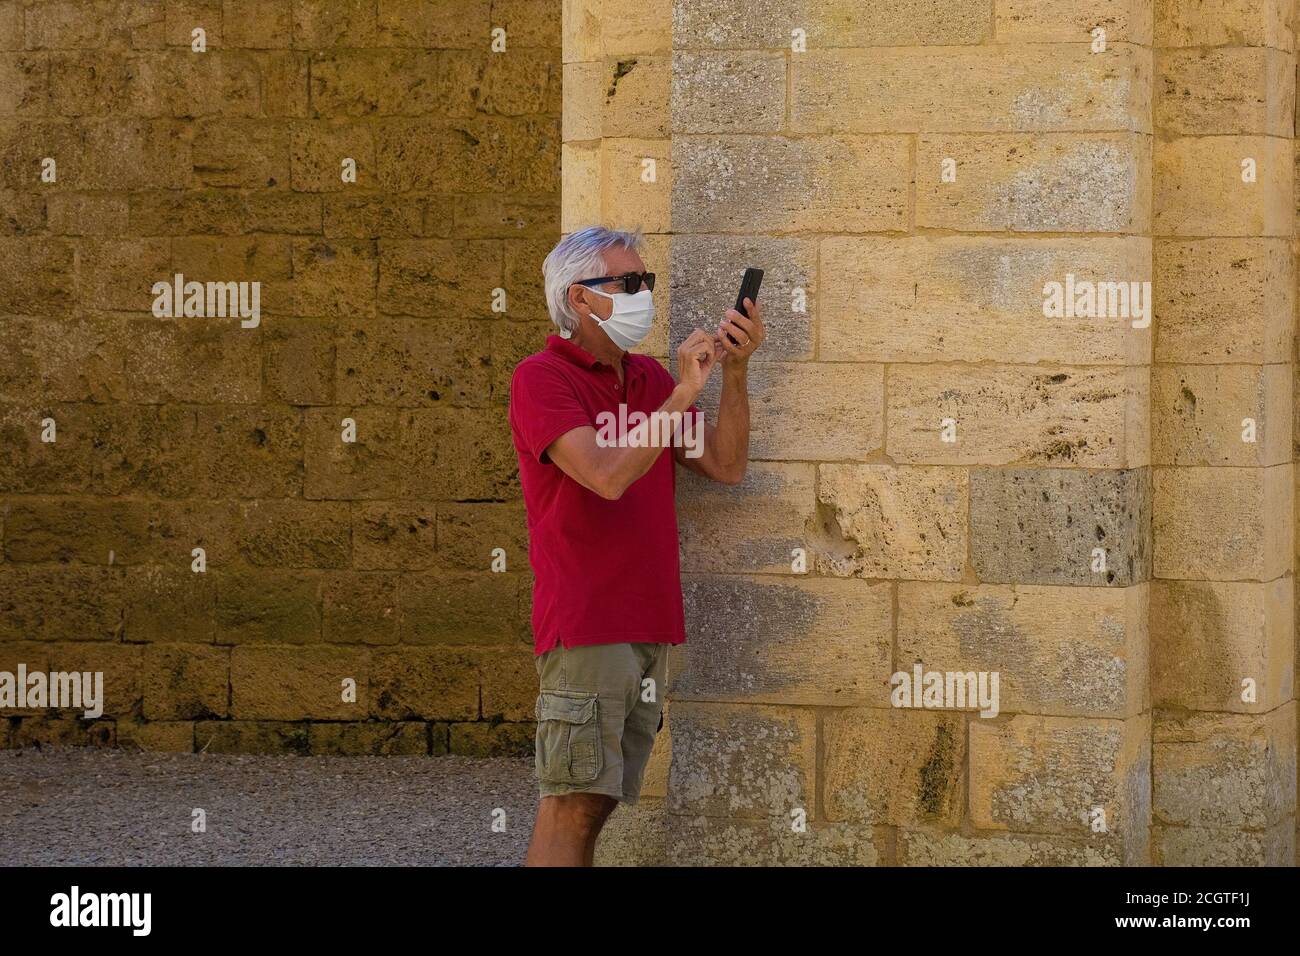 Monticiano,Italy-Sept 7 2020. A tourist wearing a mask takes photos with his phone in the historic roofless 13th century gothic San Galgano Abbey Stock Photo